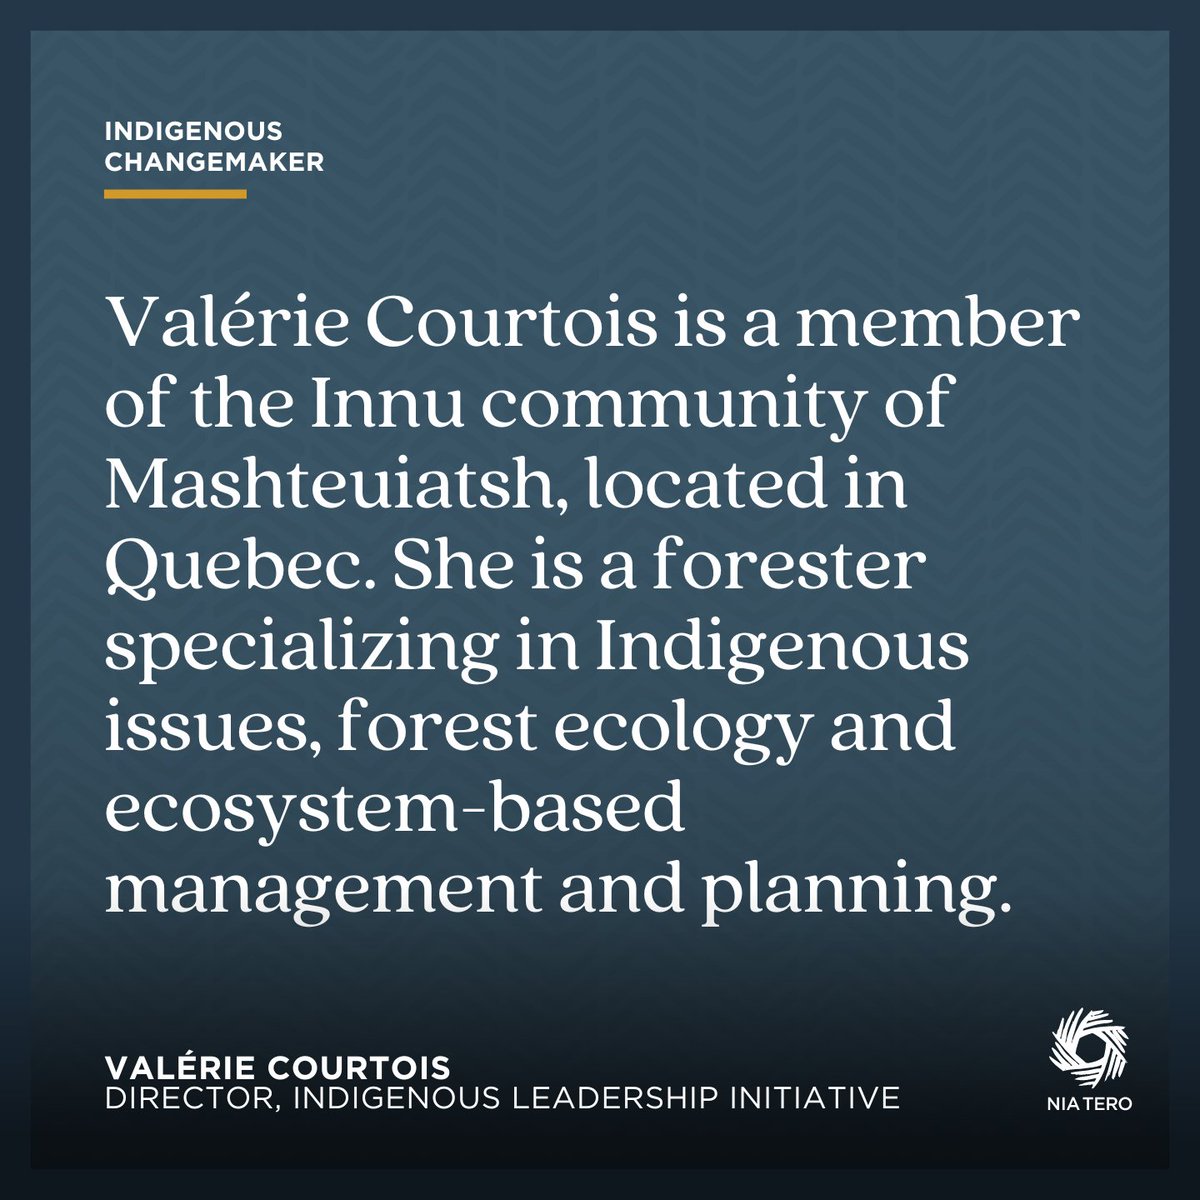 Meet #Indigenous changemaker Valérie Courtois, who is working to advance #Indigenousguardianship of our planet at #ClimateWeek in New York City. 

Stay tuned throughout #ClimateWeekNYC to learn more about #IndigenousChangemakers to follow. #IndigenousGuardians @ILInationhood